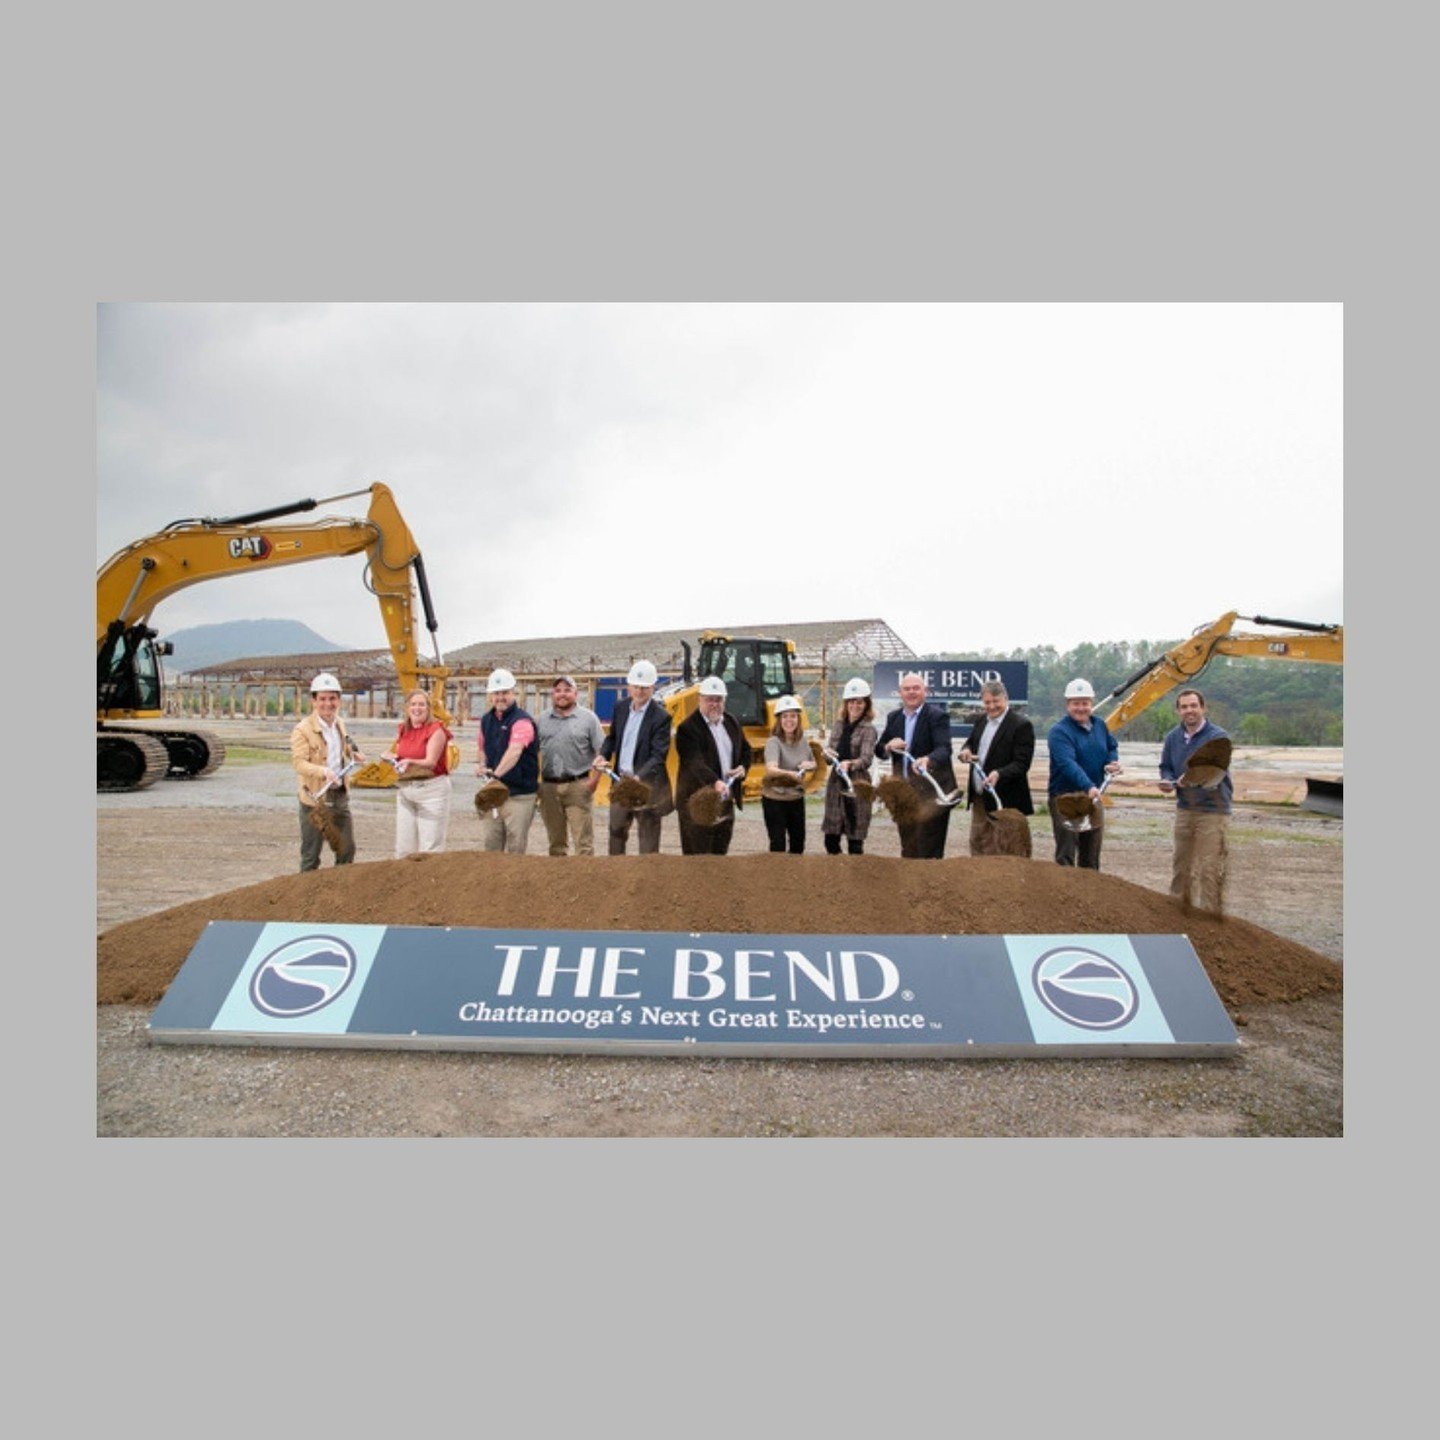 We officially broke ground, and the infrastructure construction has started at The Bend! The area will become a pedestrian friendly, multi-modal extension of downtown offering a dynamic day-to-night waterfront experience and a desirable place to live